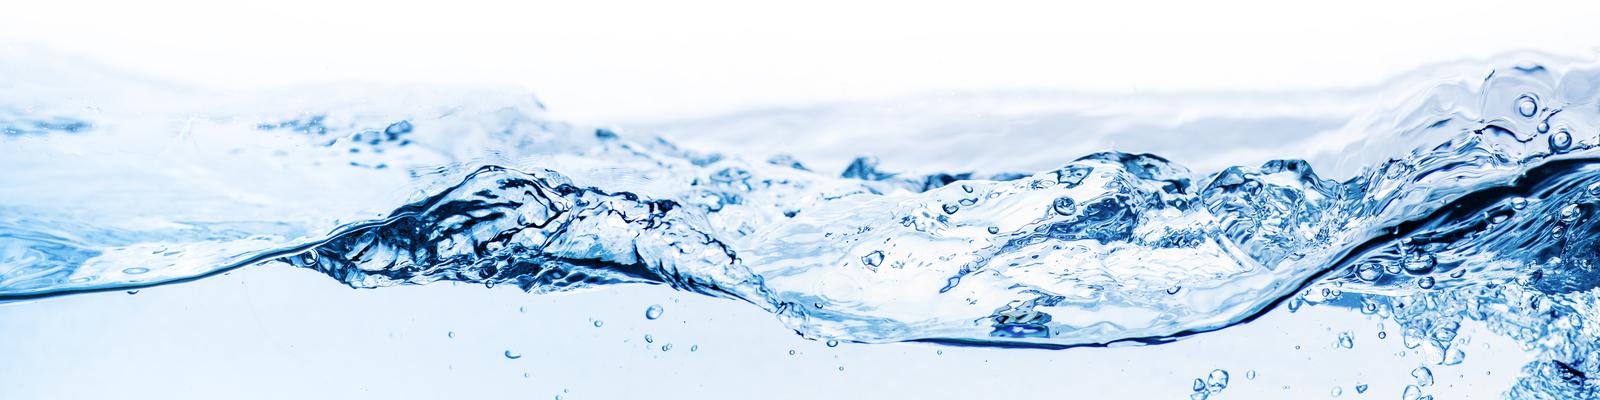 Abstract picture of flowing water on white background.